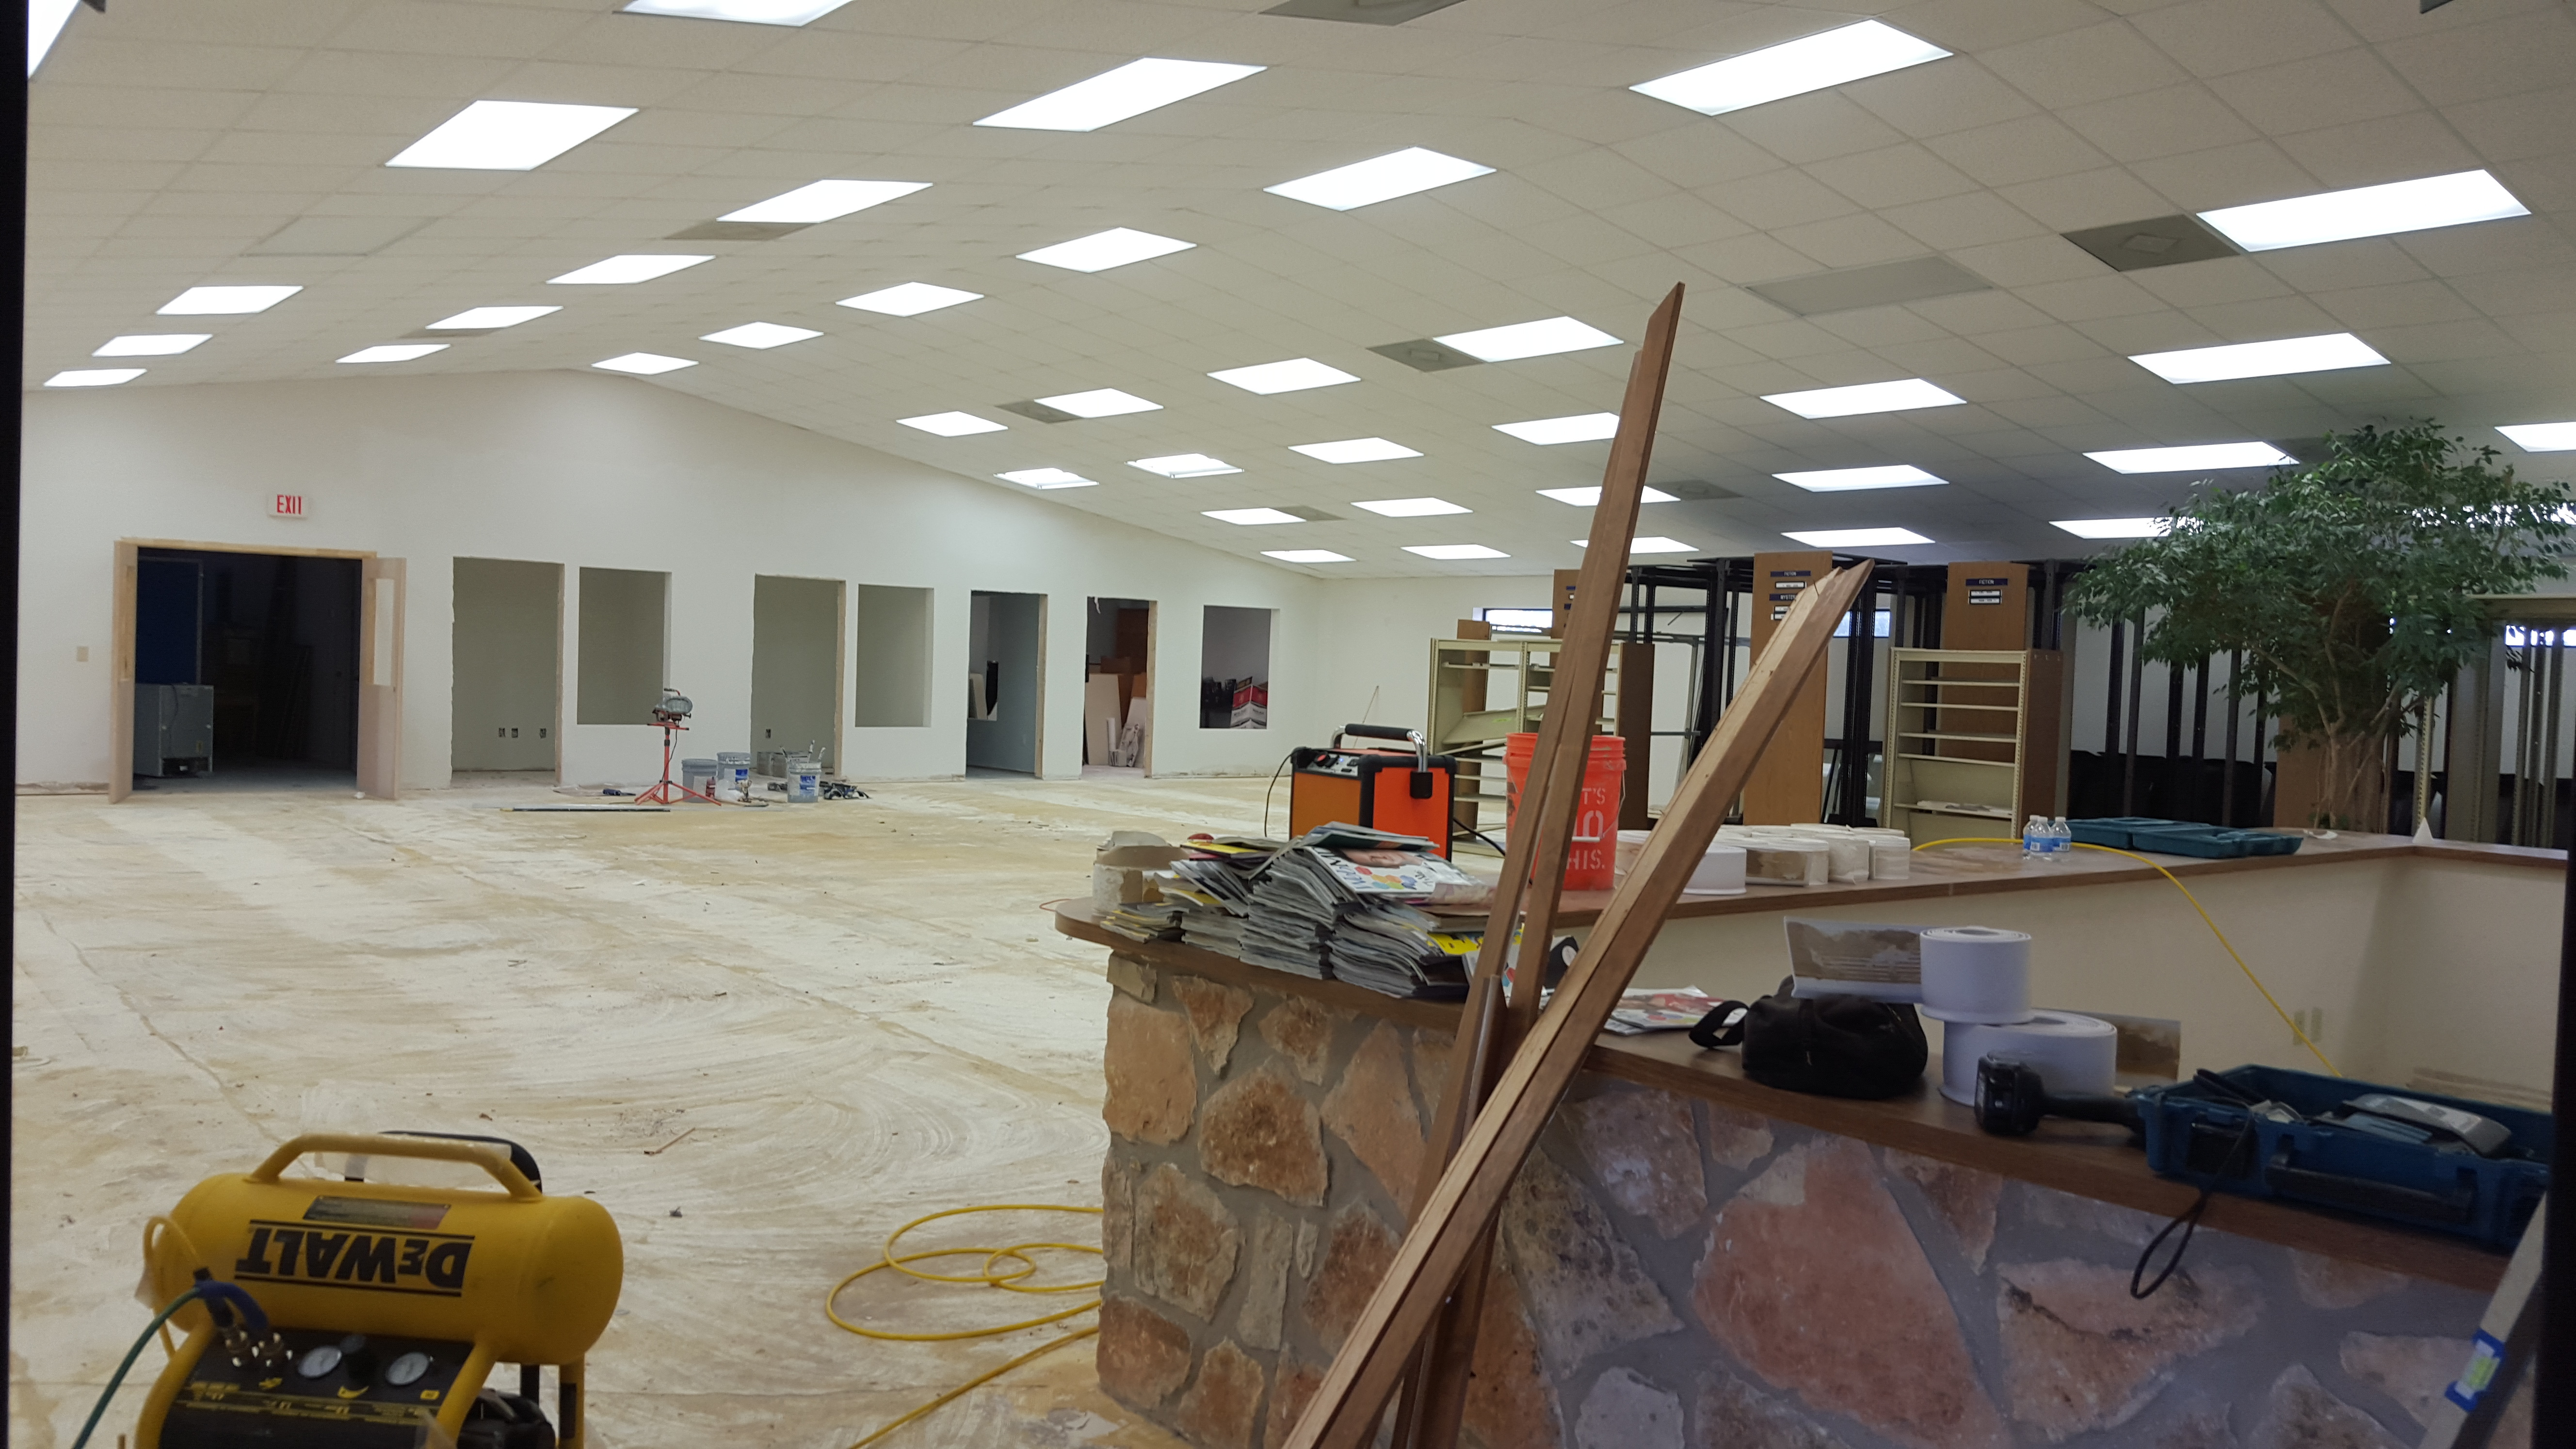 Library Expansion - Construciton - 10-7-16 -01.jpg